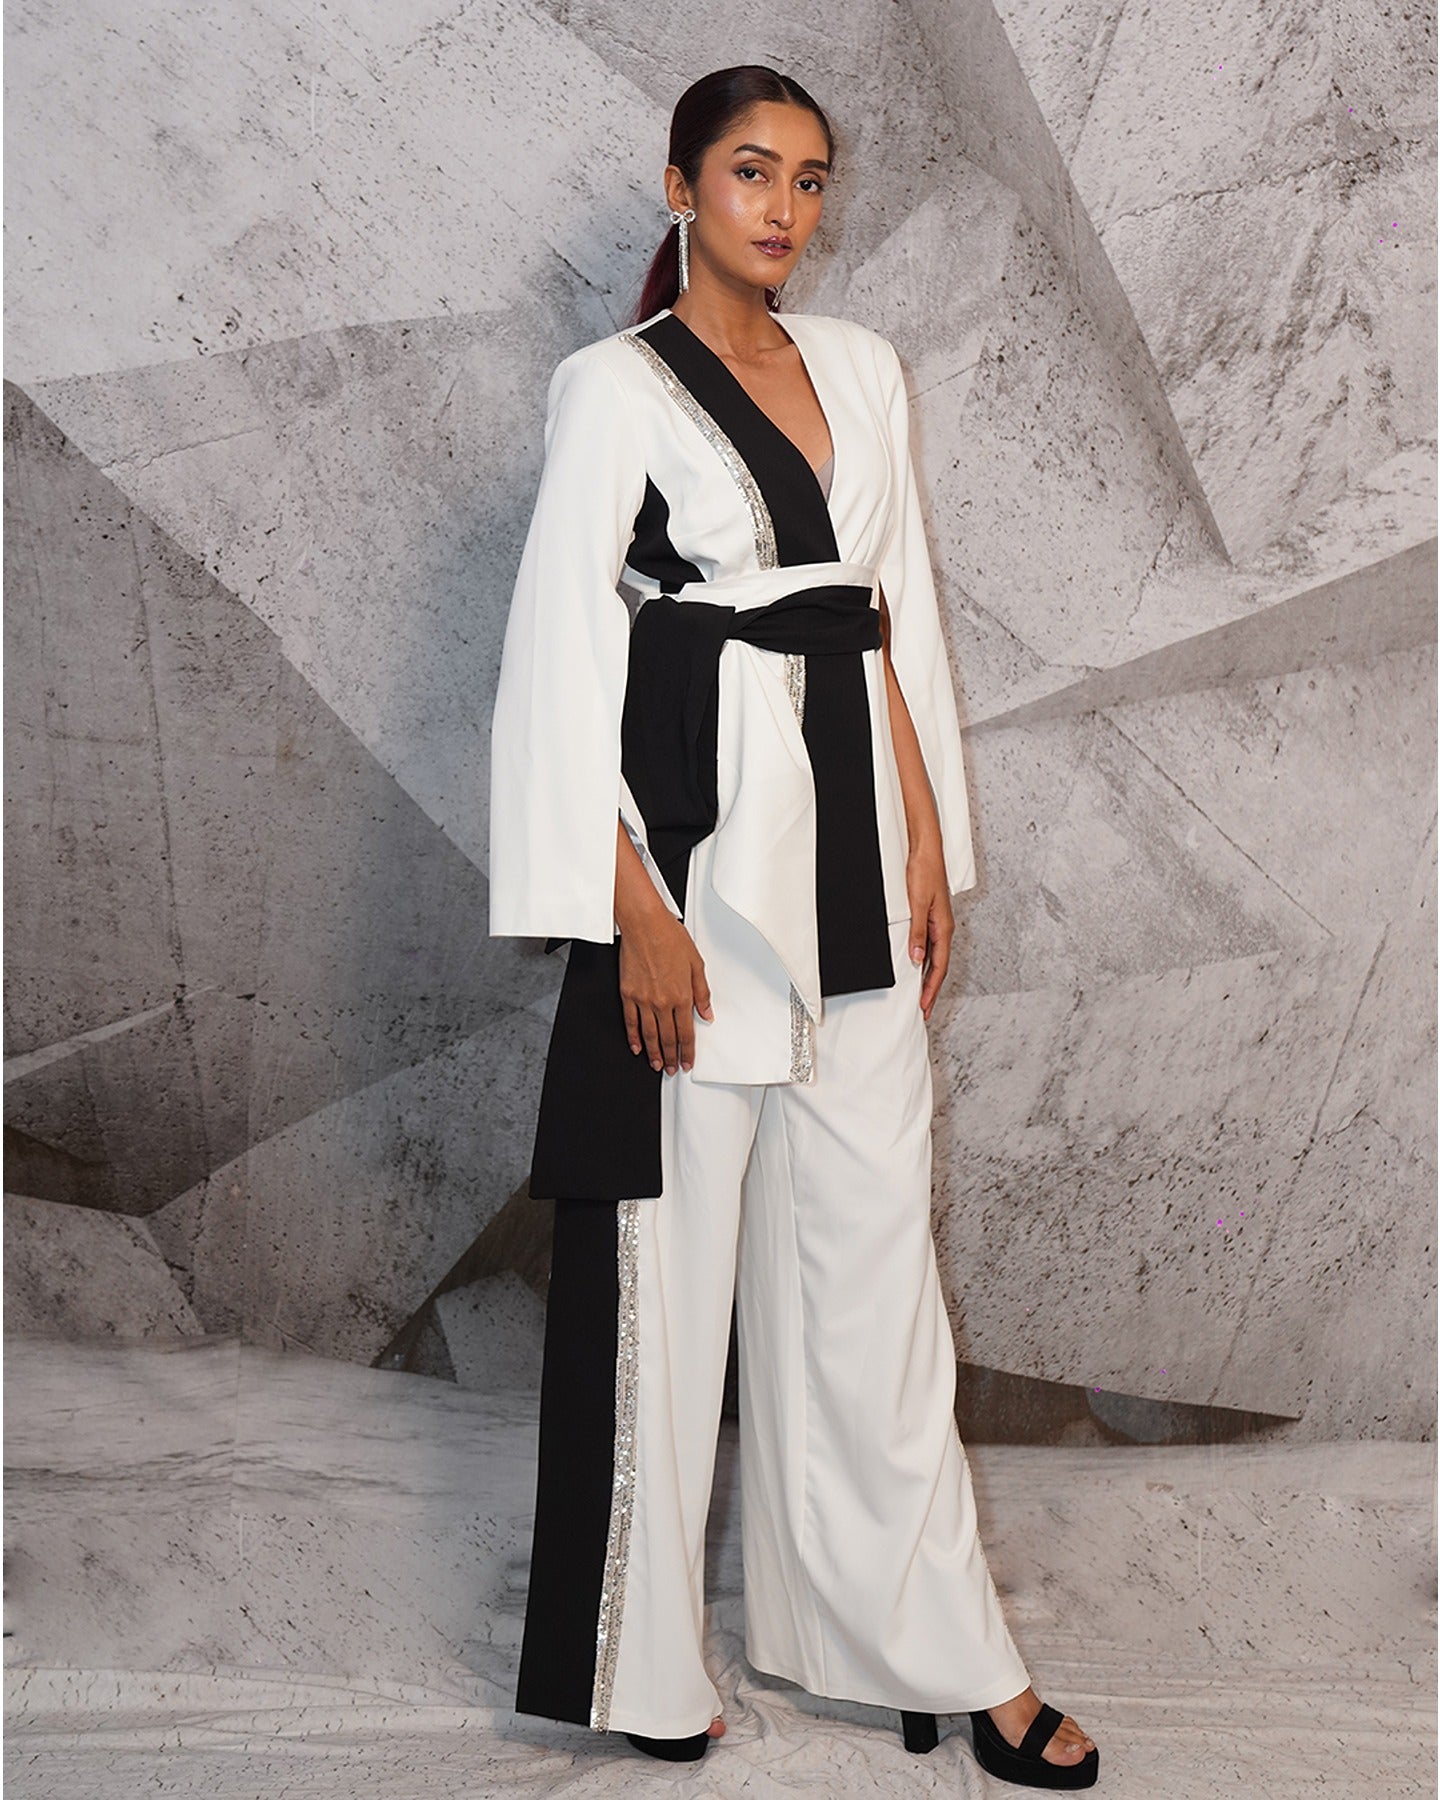 Where the timeless allure of white meets the bold sophistication of black, elegance takes center stage in this blazer suit ensemble.